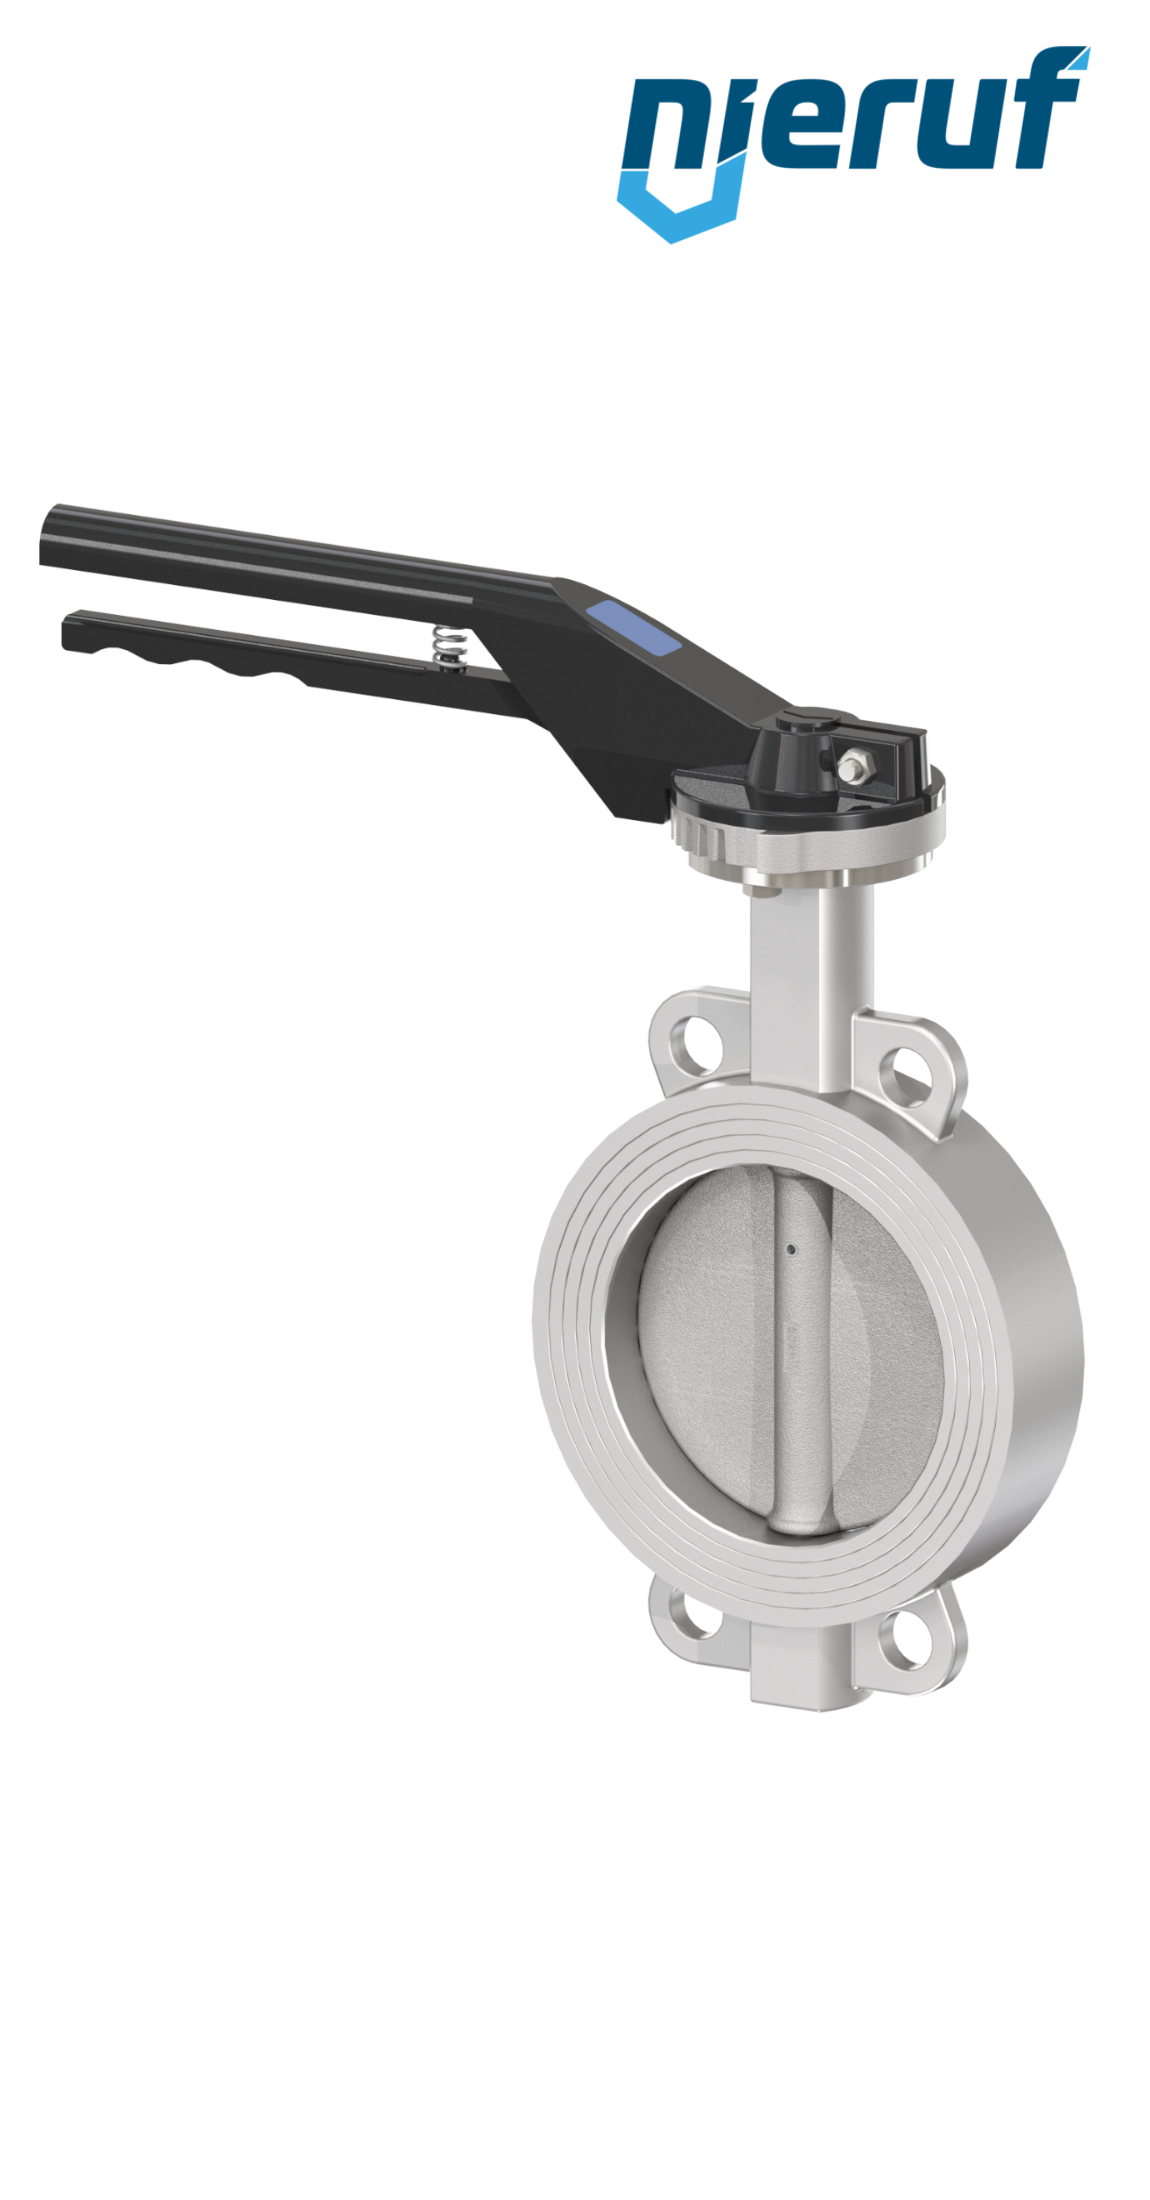 Butterfly-valve-stainless-steel DN300 PN16 AK08 metall notch lever